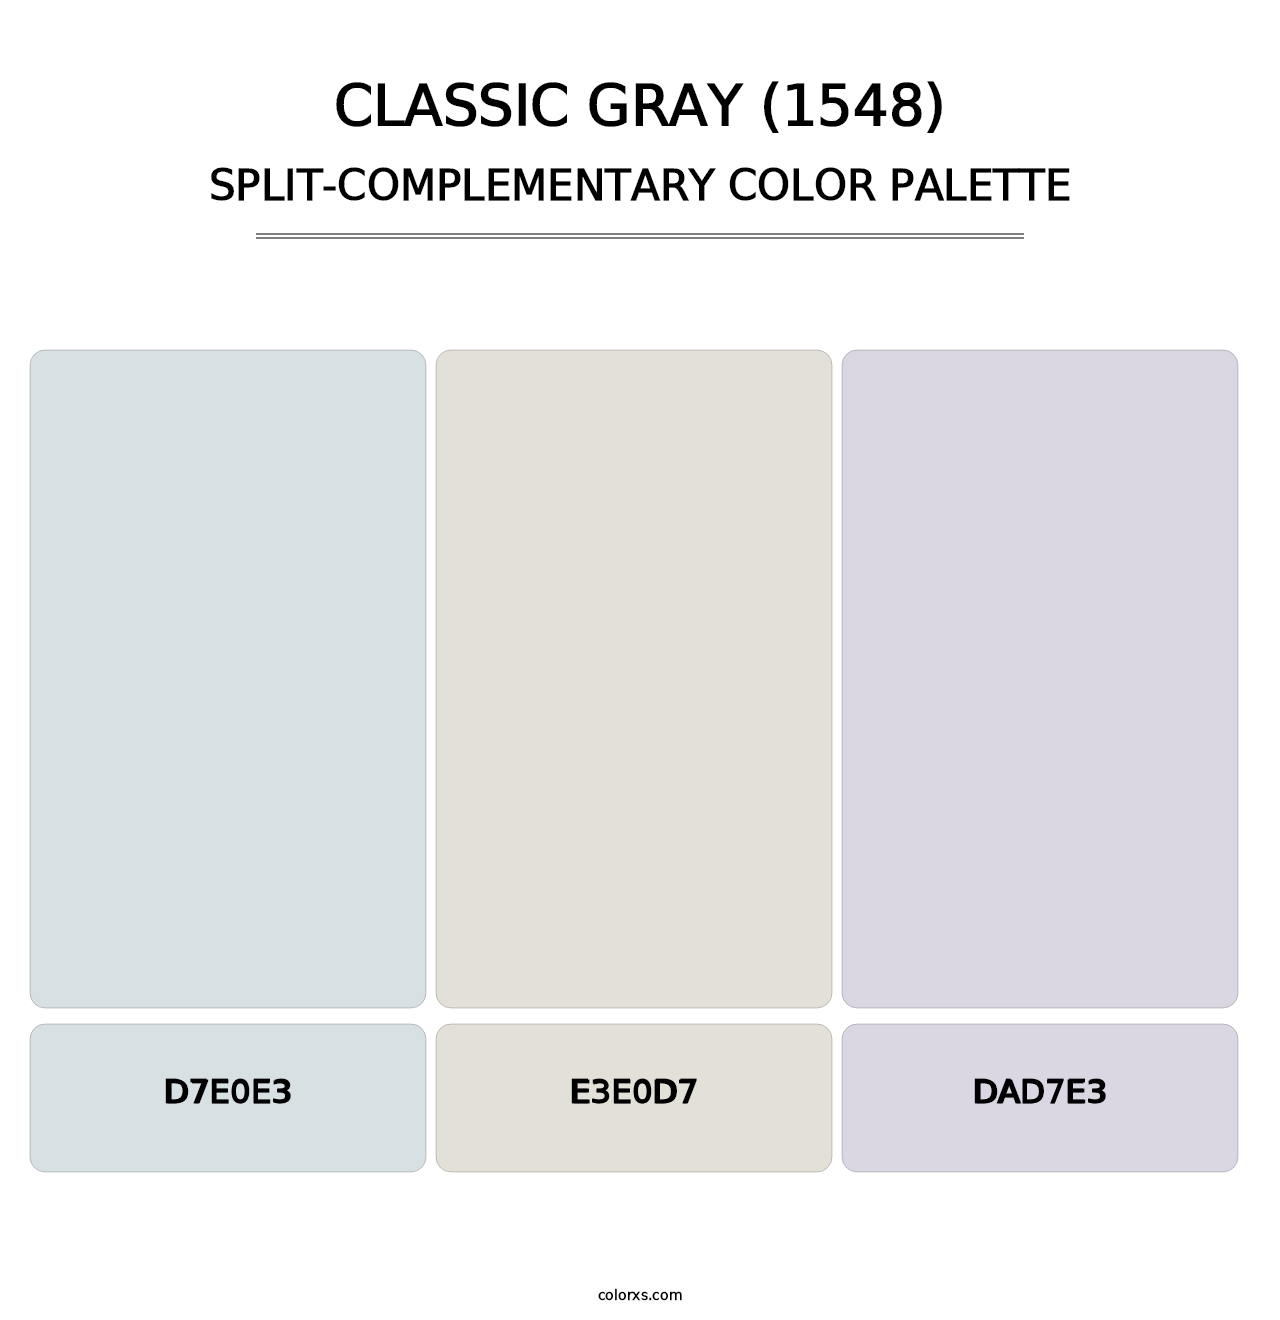 Classic Gray (1548) - Split-Complementary Color Palette